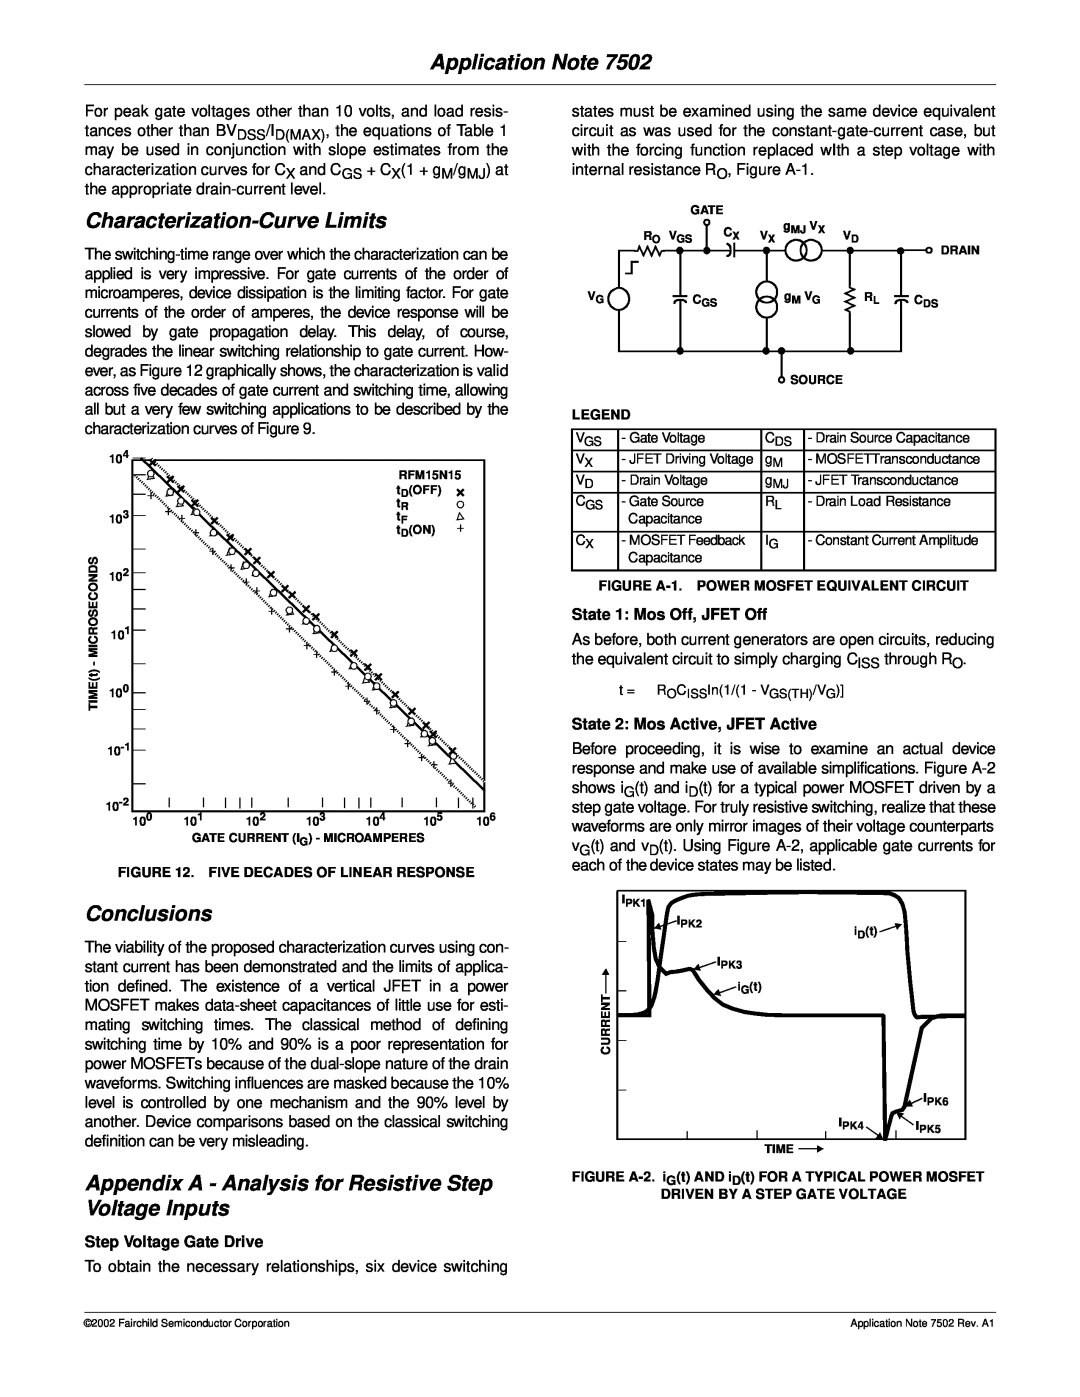 Fairchild AN-7502 Characterization-Curve Limits, Conclusions, Appendix A - Analysis for Resistive Step Voltage Inputs 